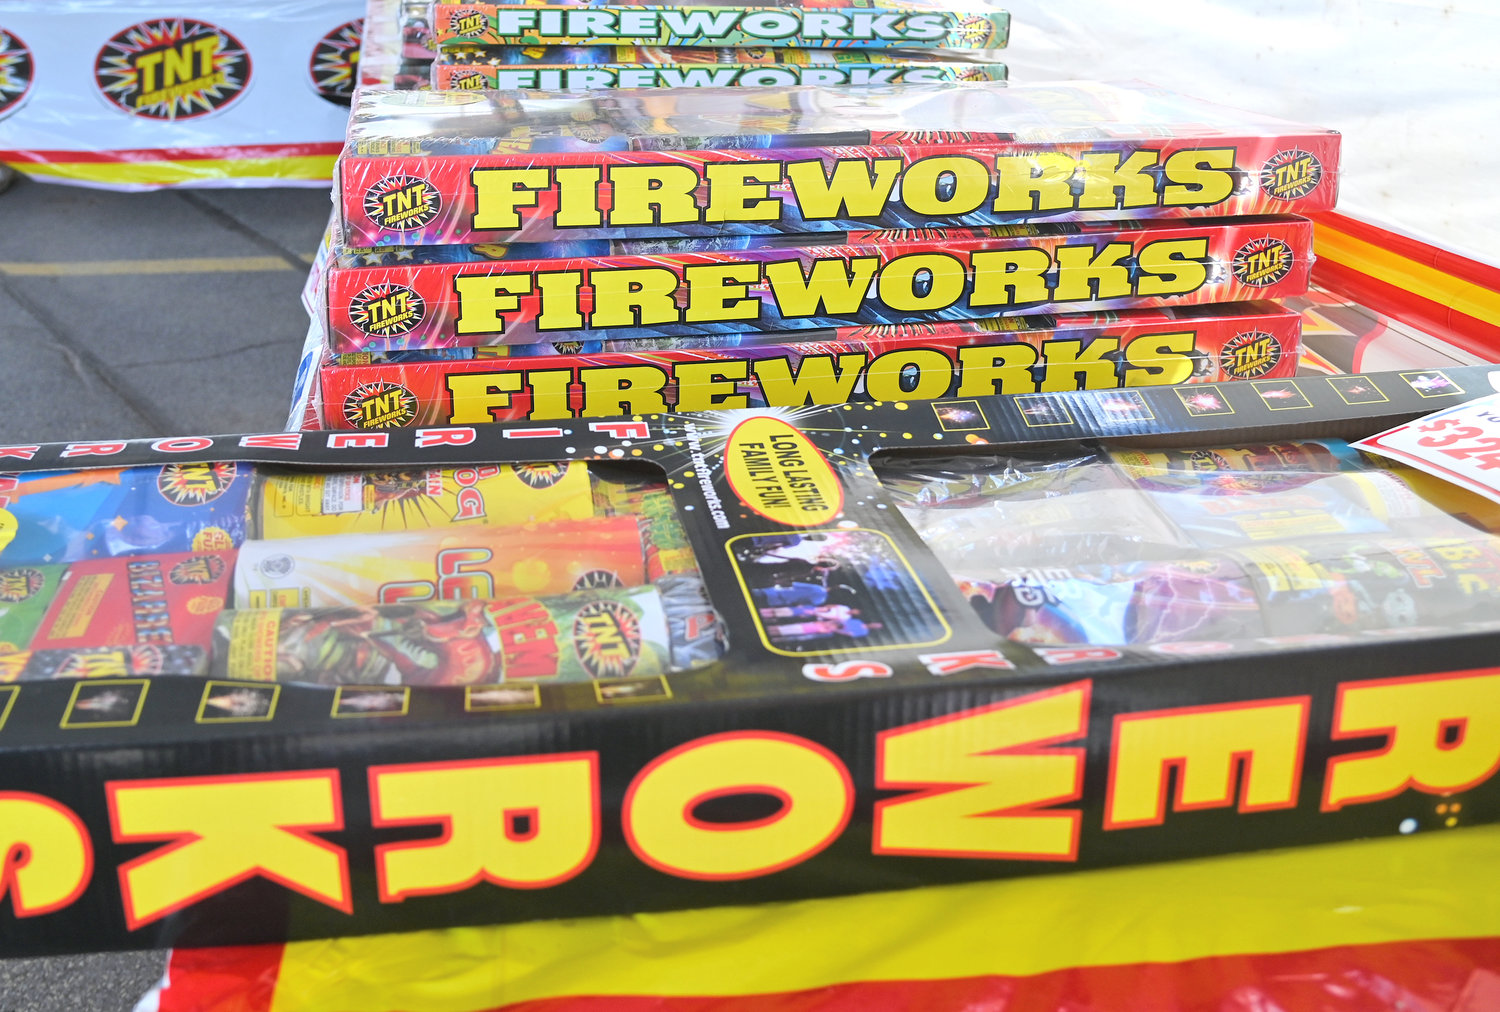 Sparklers, snakes, poppers and other small, legal fireworks for sale at TNT Fireworks in Rome.